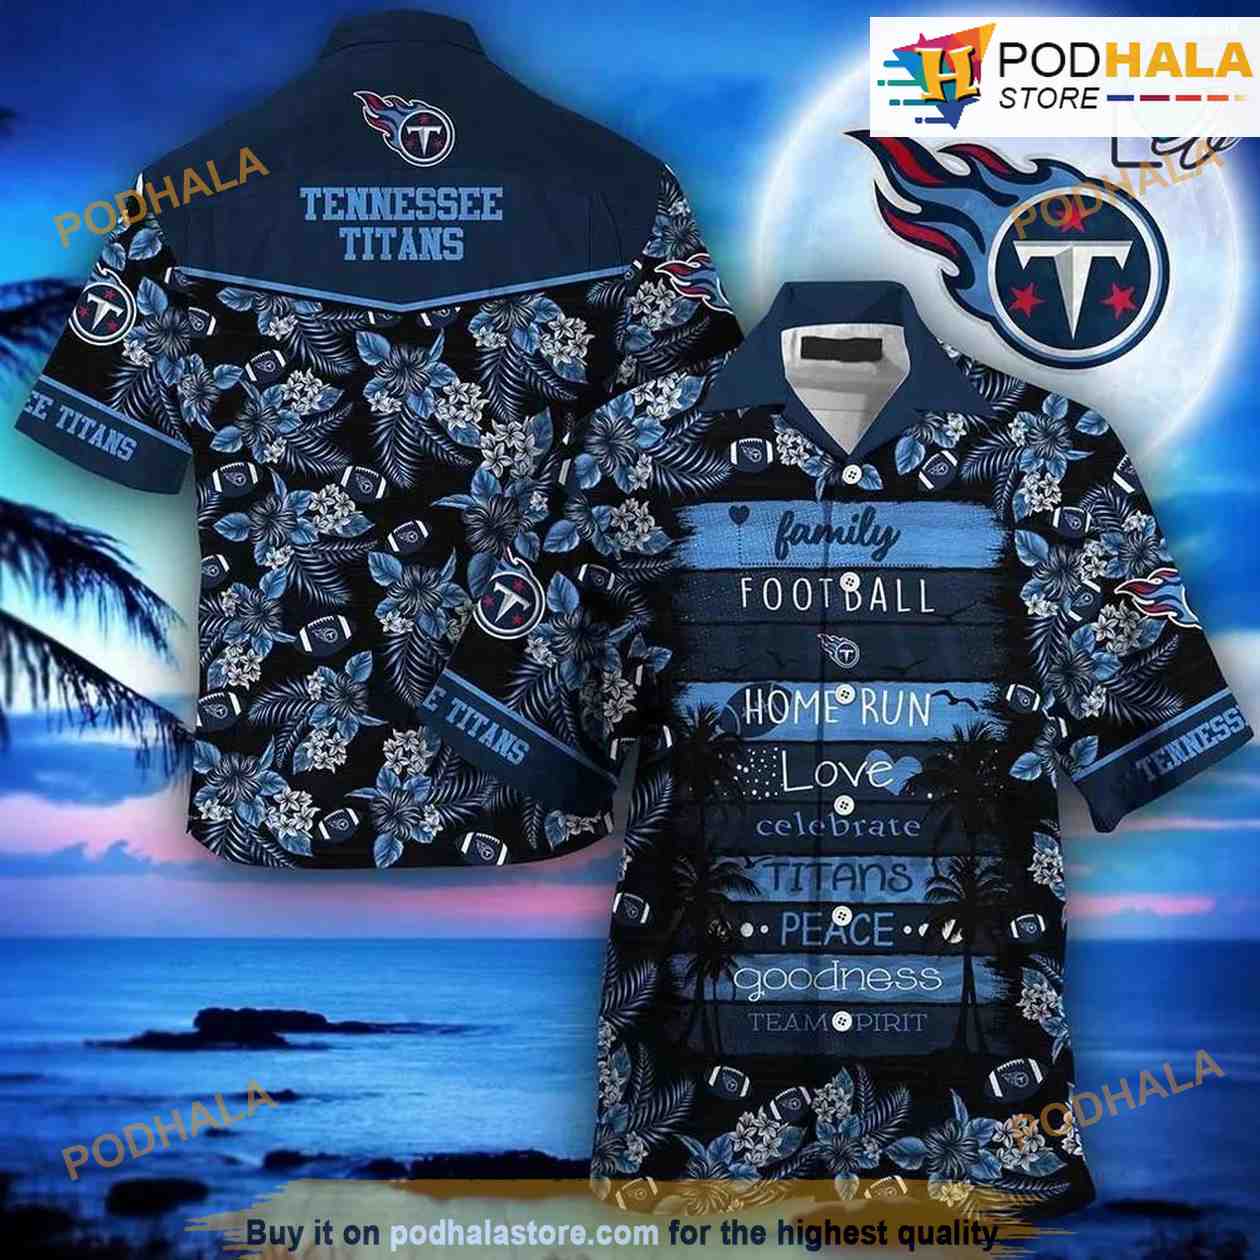 tennessee titans team store